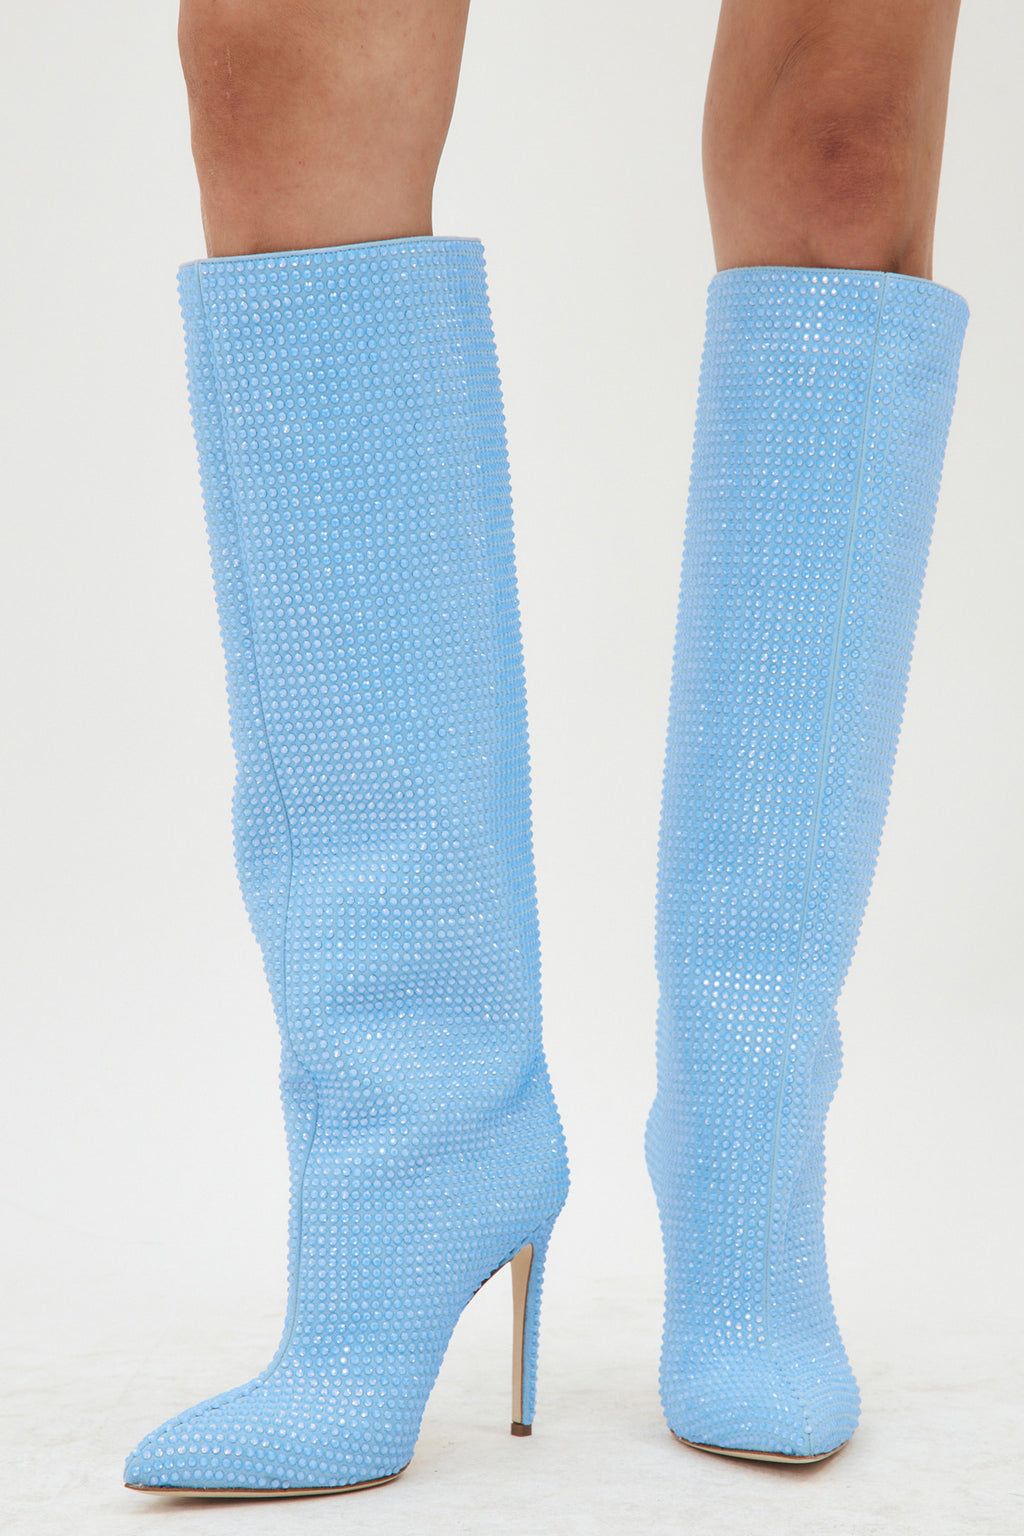 Holly Blue Opal Stiletto Crystal Boots